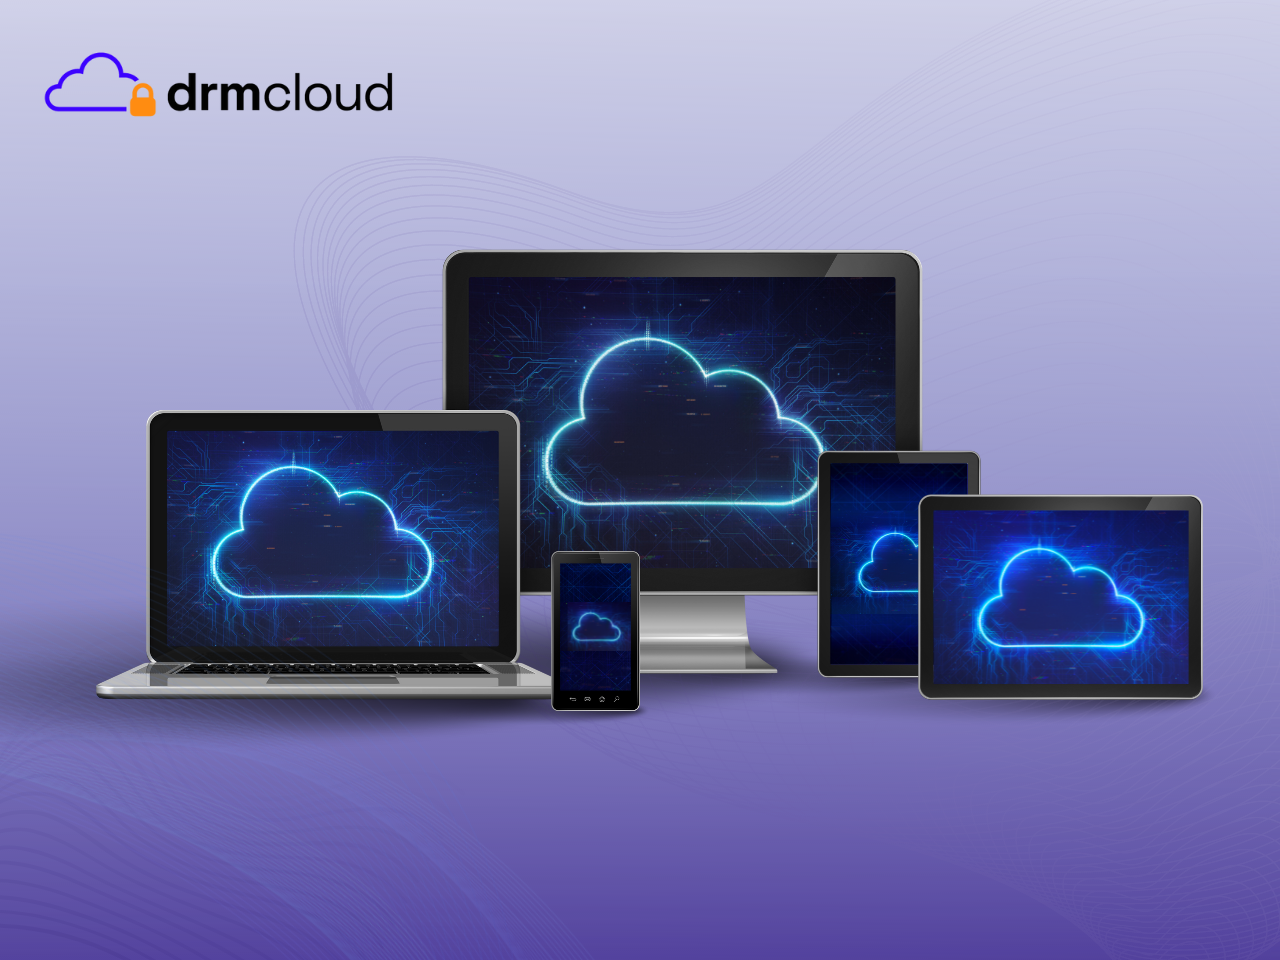 The image shows different devices - a laptop, a smartphone, a tablet etc. - displaying a glowing symbol of cloud.